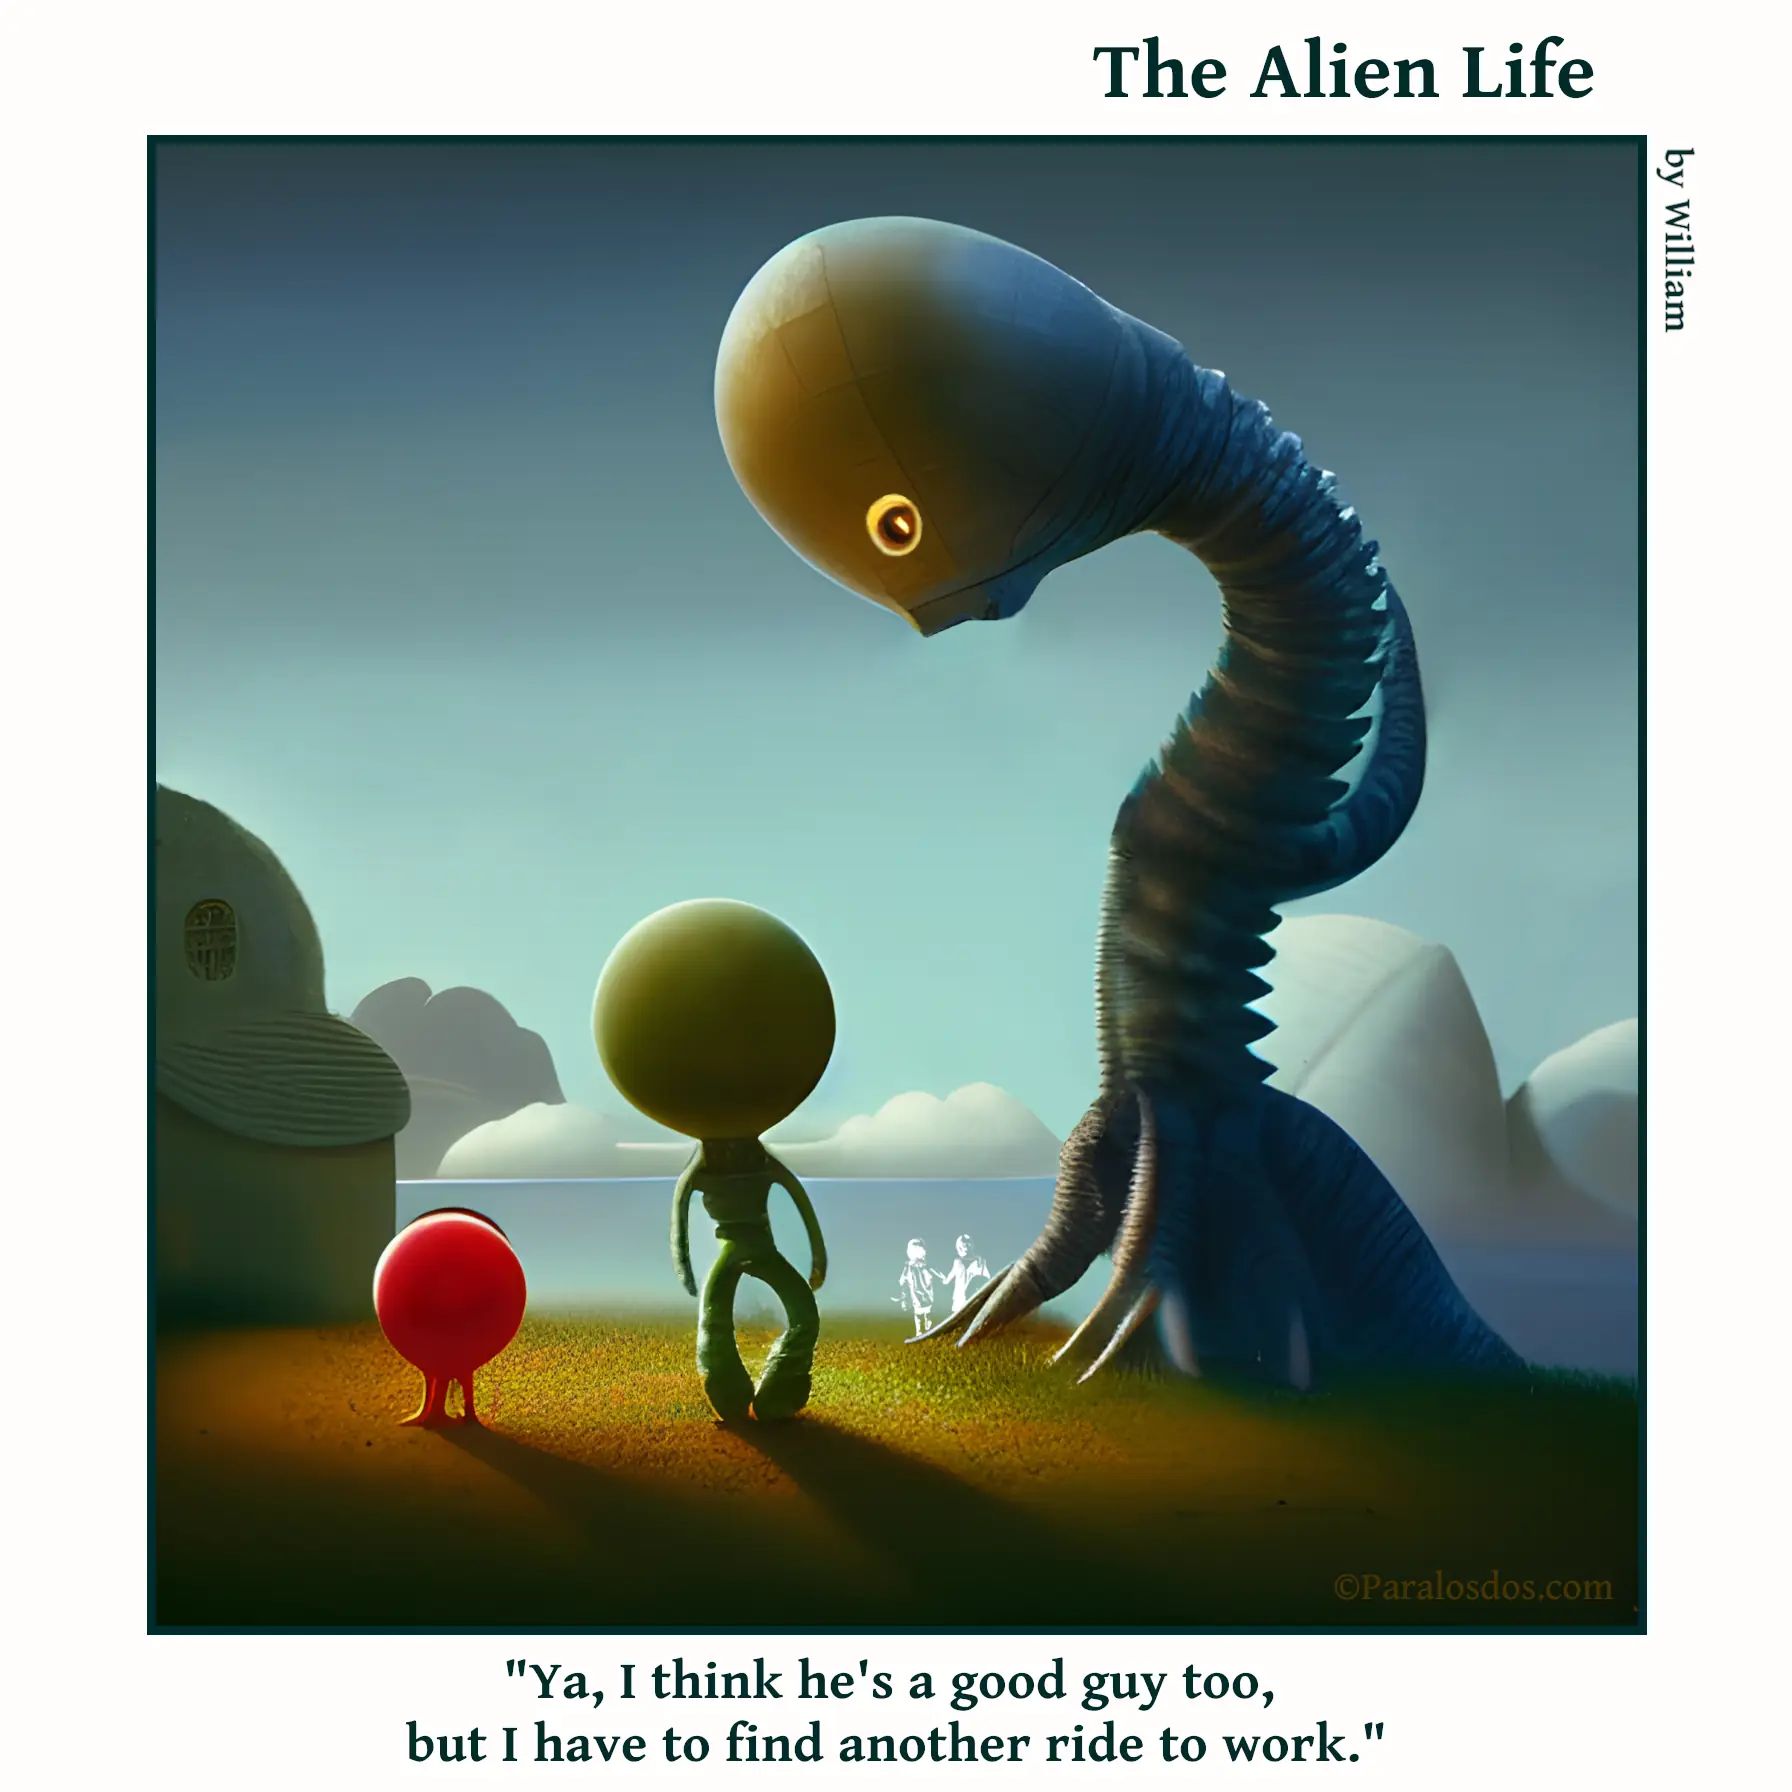 The Alien Life, one panel Comic. Two aliens are walking away from a big horse looking alien. One of the aliens is very bow-legged. The caption reads: "Ya, I think he's a good guy too, but I have to find another ride to work."